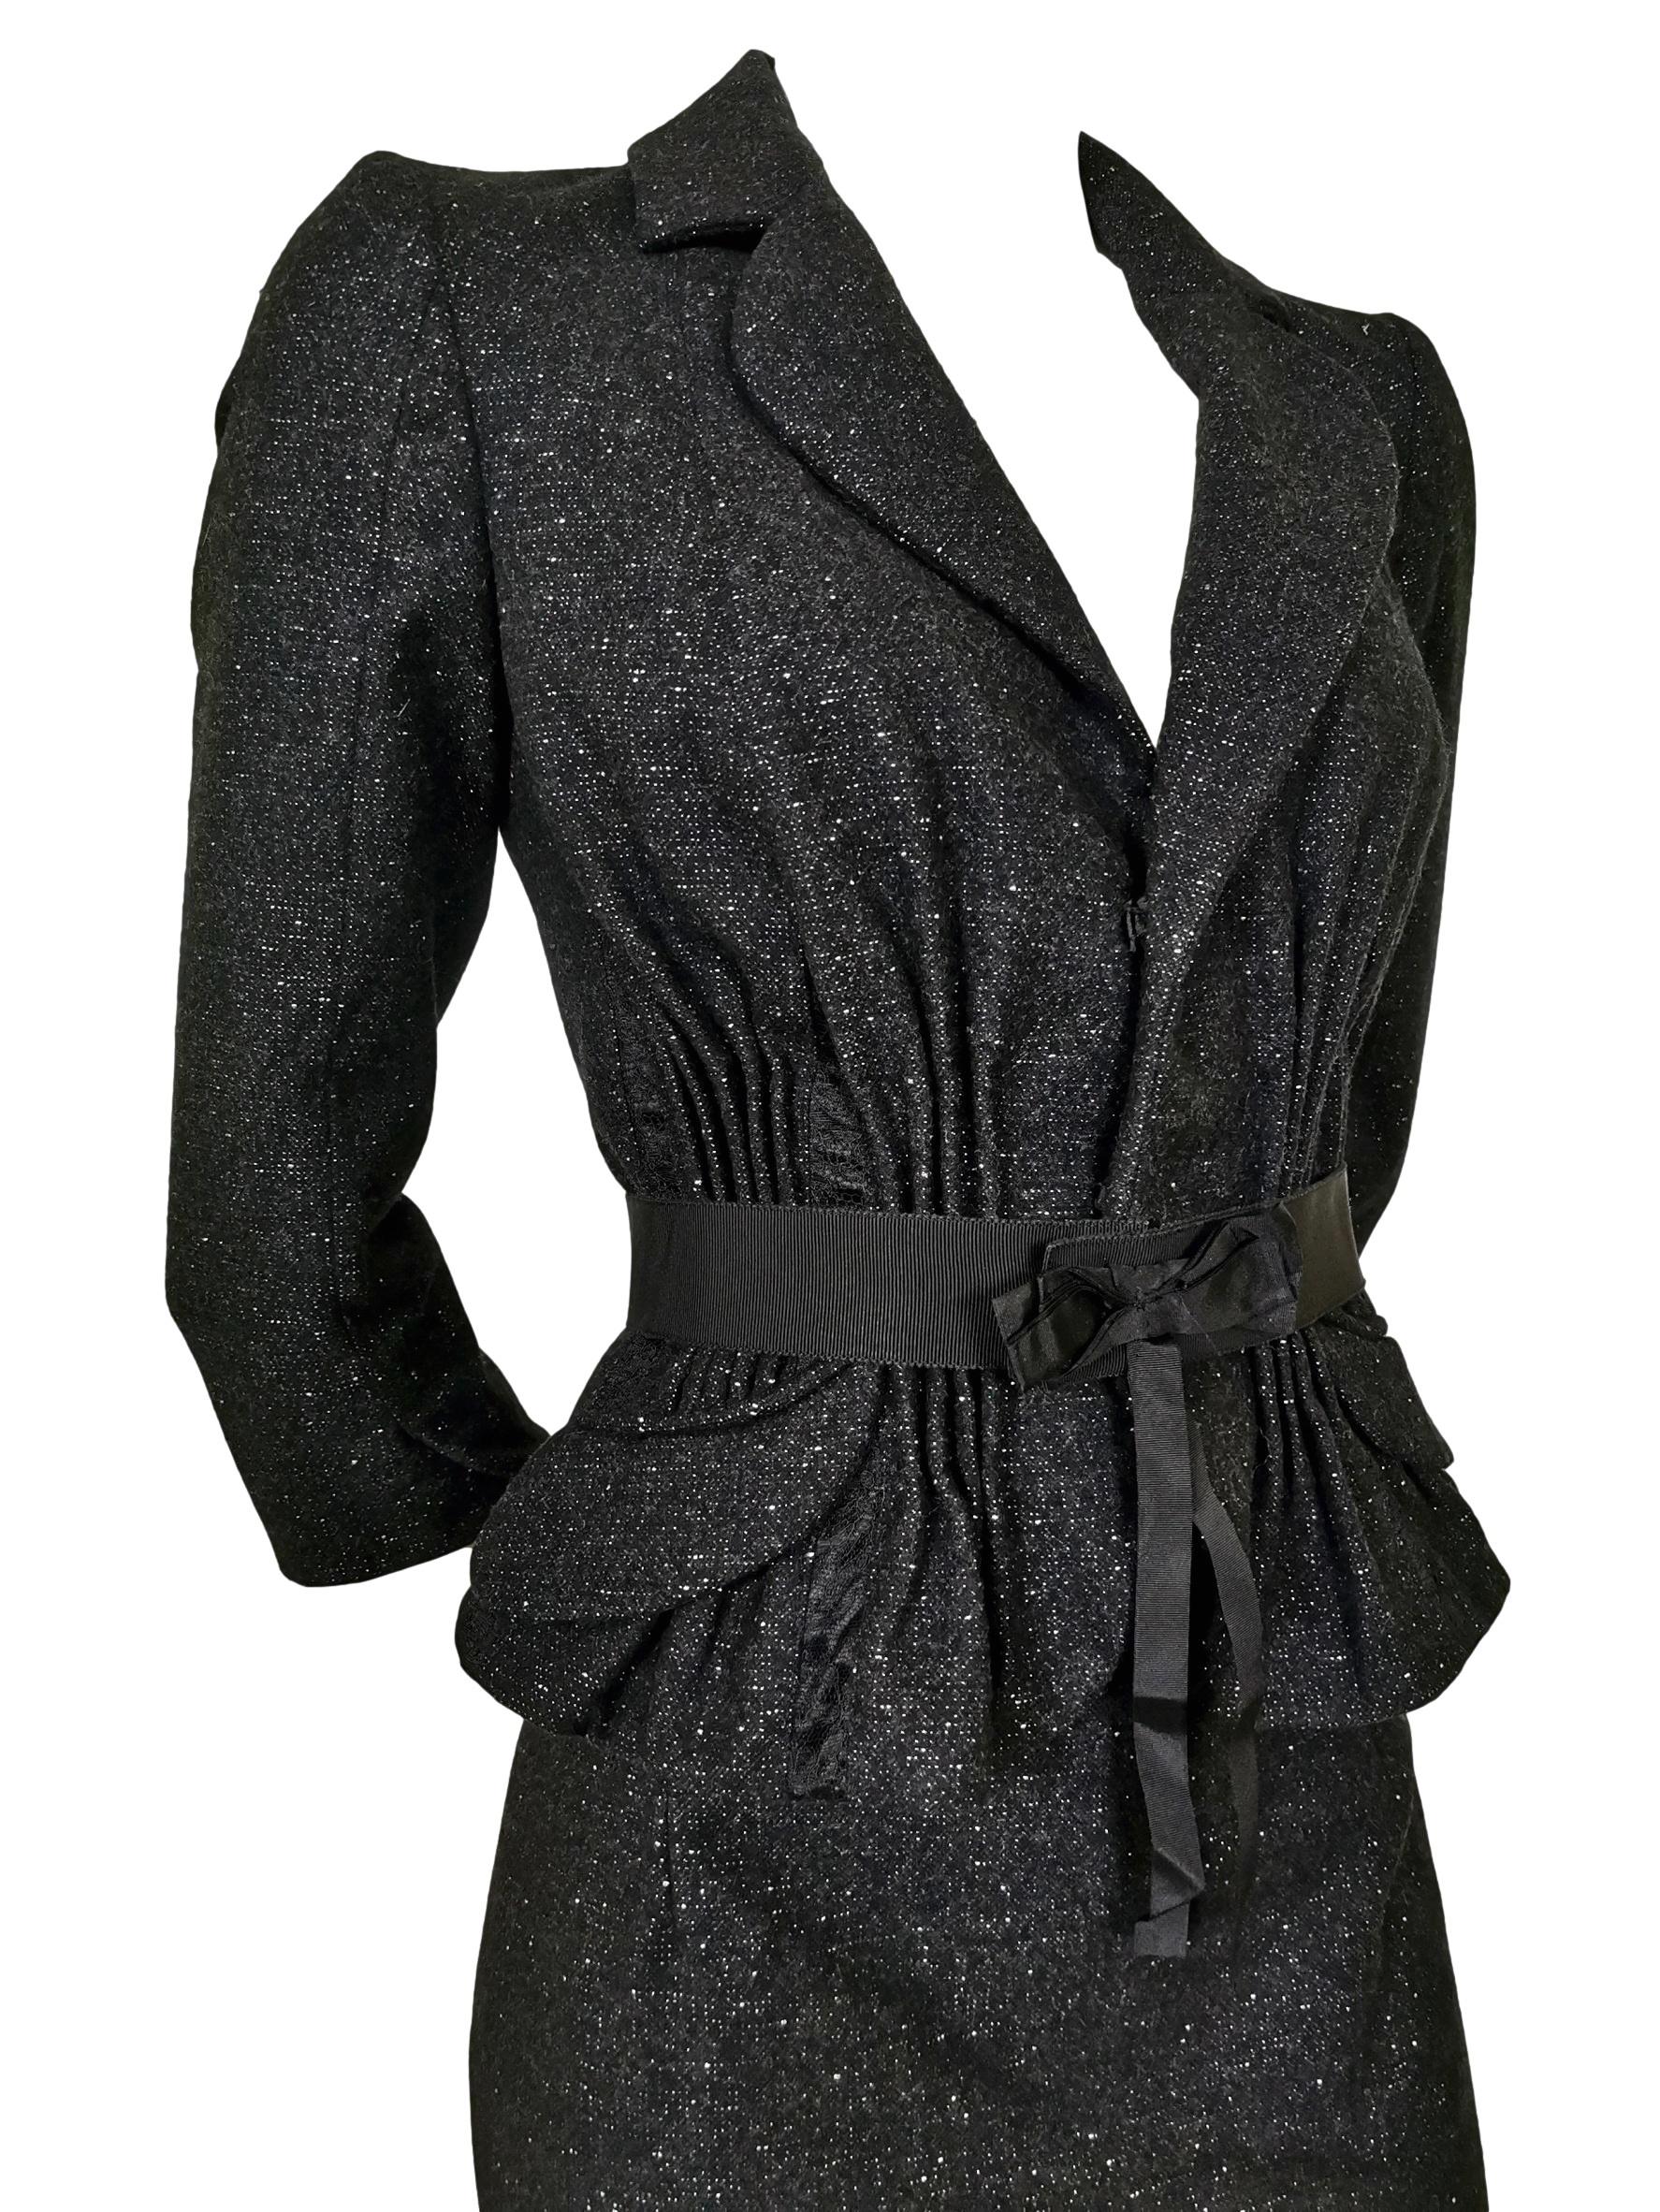 John Galliano Wool/Cashmere, Lace and Ribbon Skirt Suit A/W 2011 For Sale 4